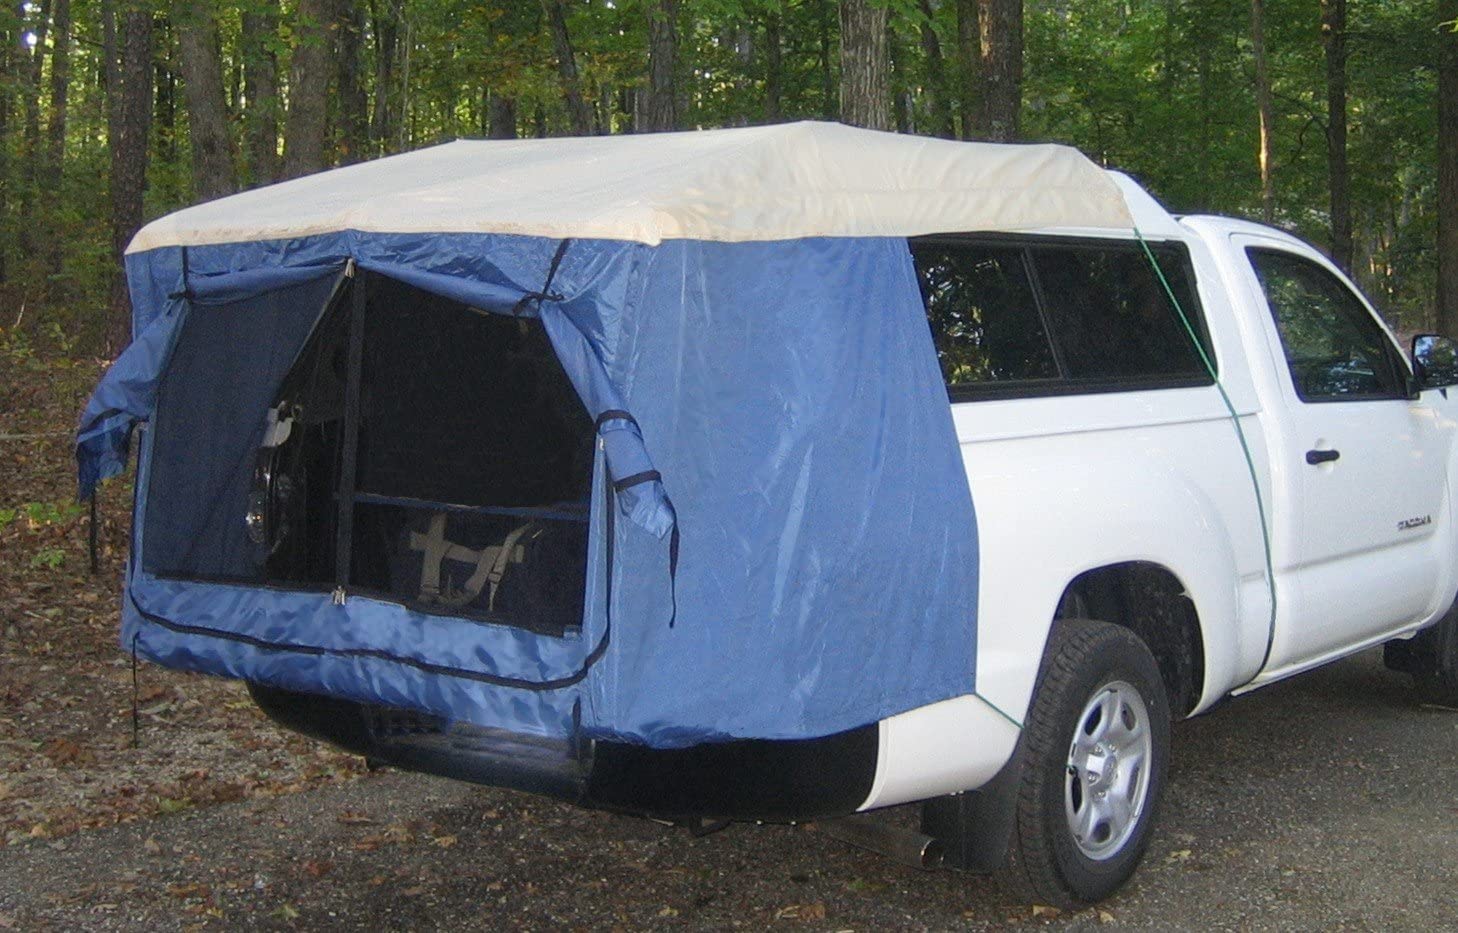 Toyota Tacoma Tent Camper – Key Facts to Know Before Buying